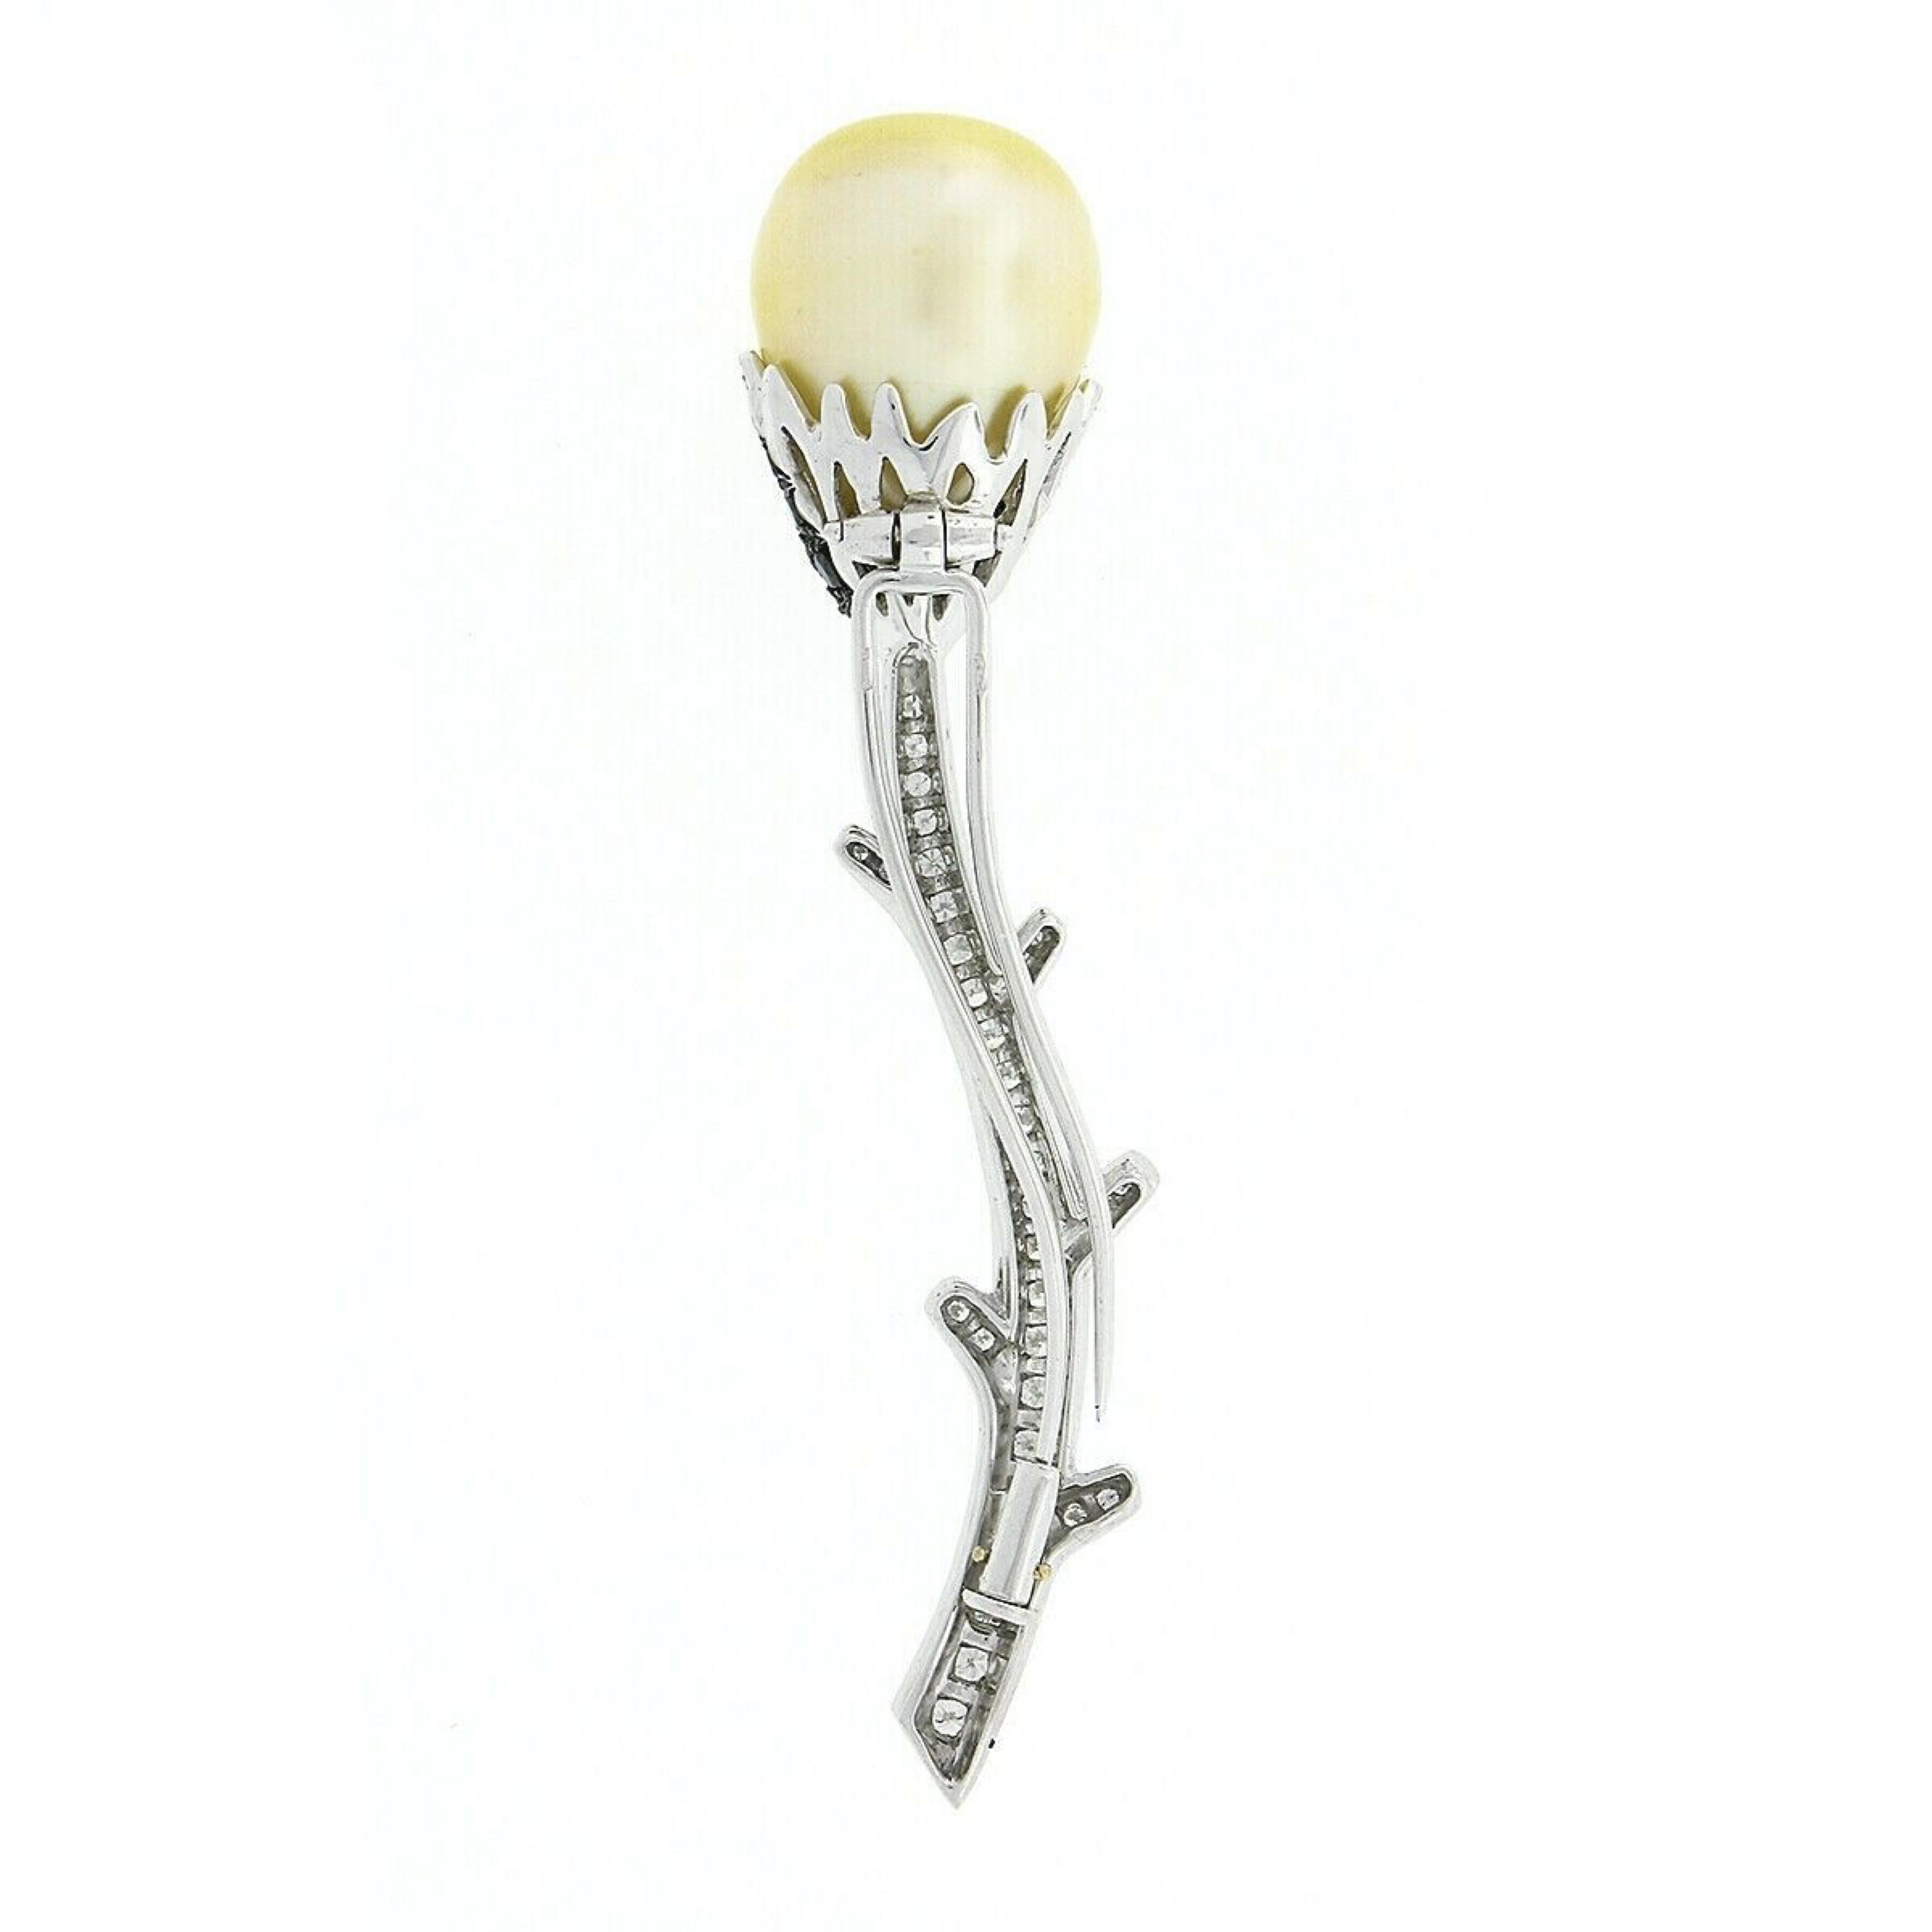 Here we have a beautiful brooch that was crafted from solid 18k white gold featuring an elegant flower design that is neatly pave set with white and fancy black diamonds and an incredible south sea pearl at its top. The pearl is stem set as the